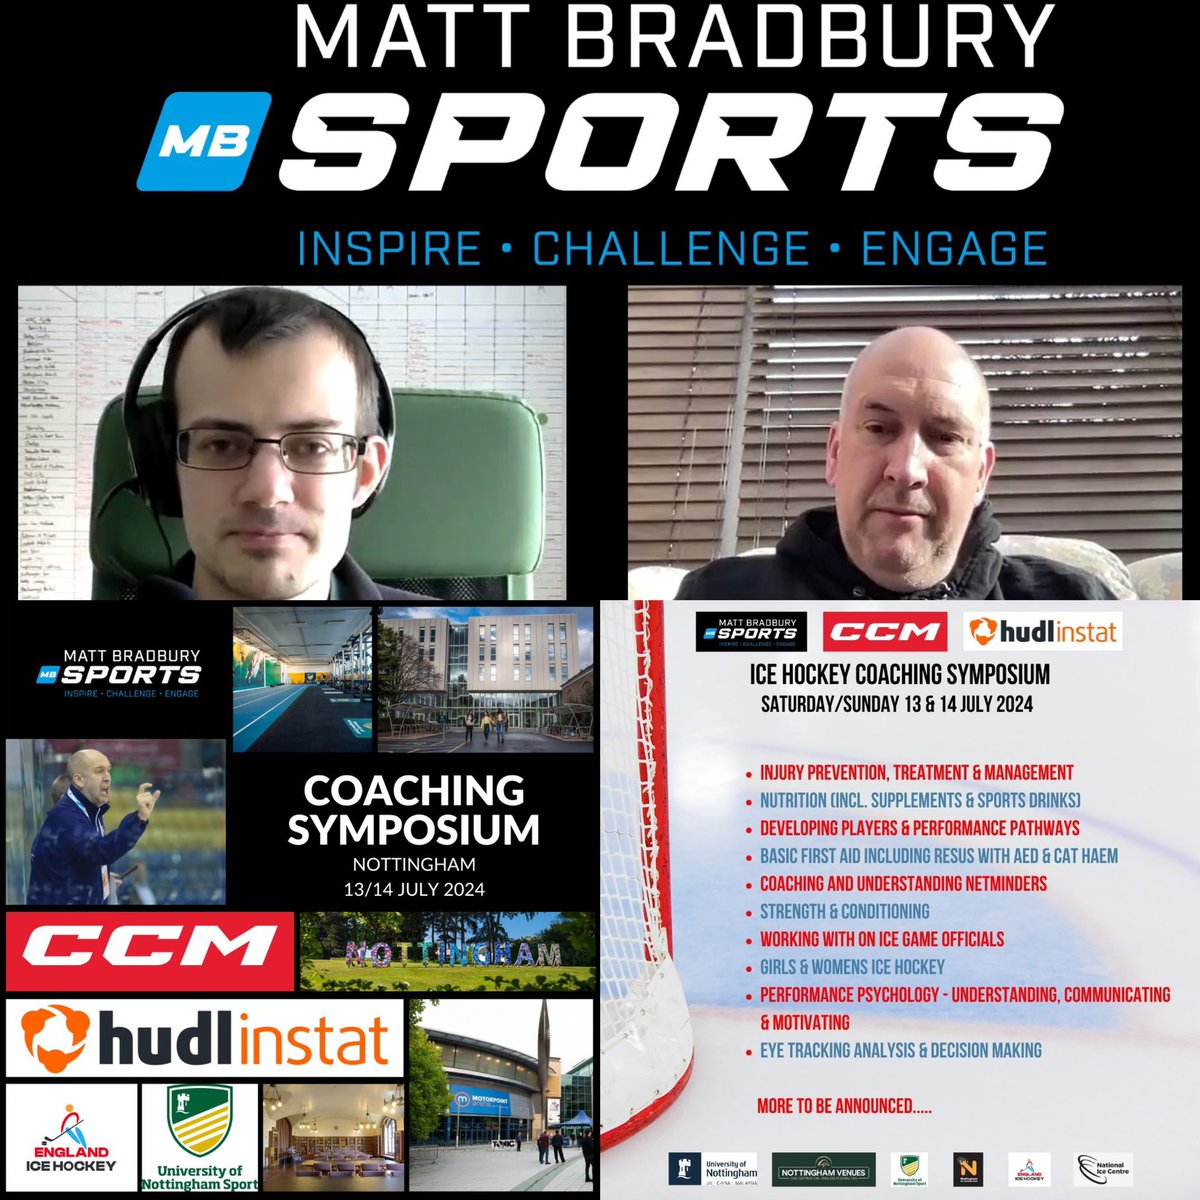 📺 Video Blog chat number 1 ➡️ bit.ly/4aPLi6y Introducing and talking ice hockey coaching symposium taking place in #Nottingham 13/14 July 2024 #Coaching #GrowthMindSet #InspireChallengeEngage